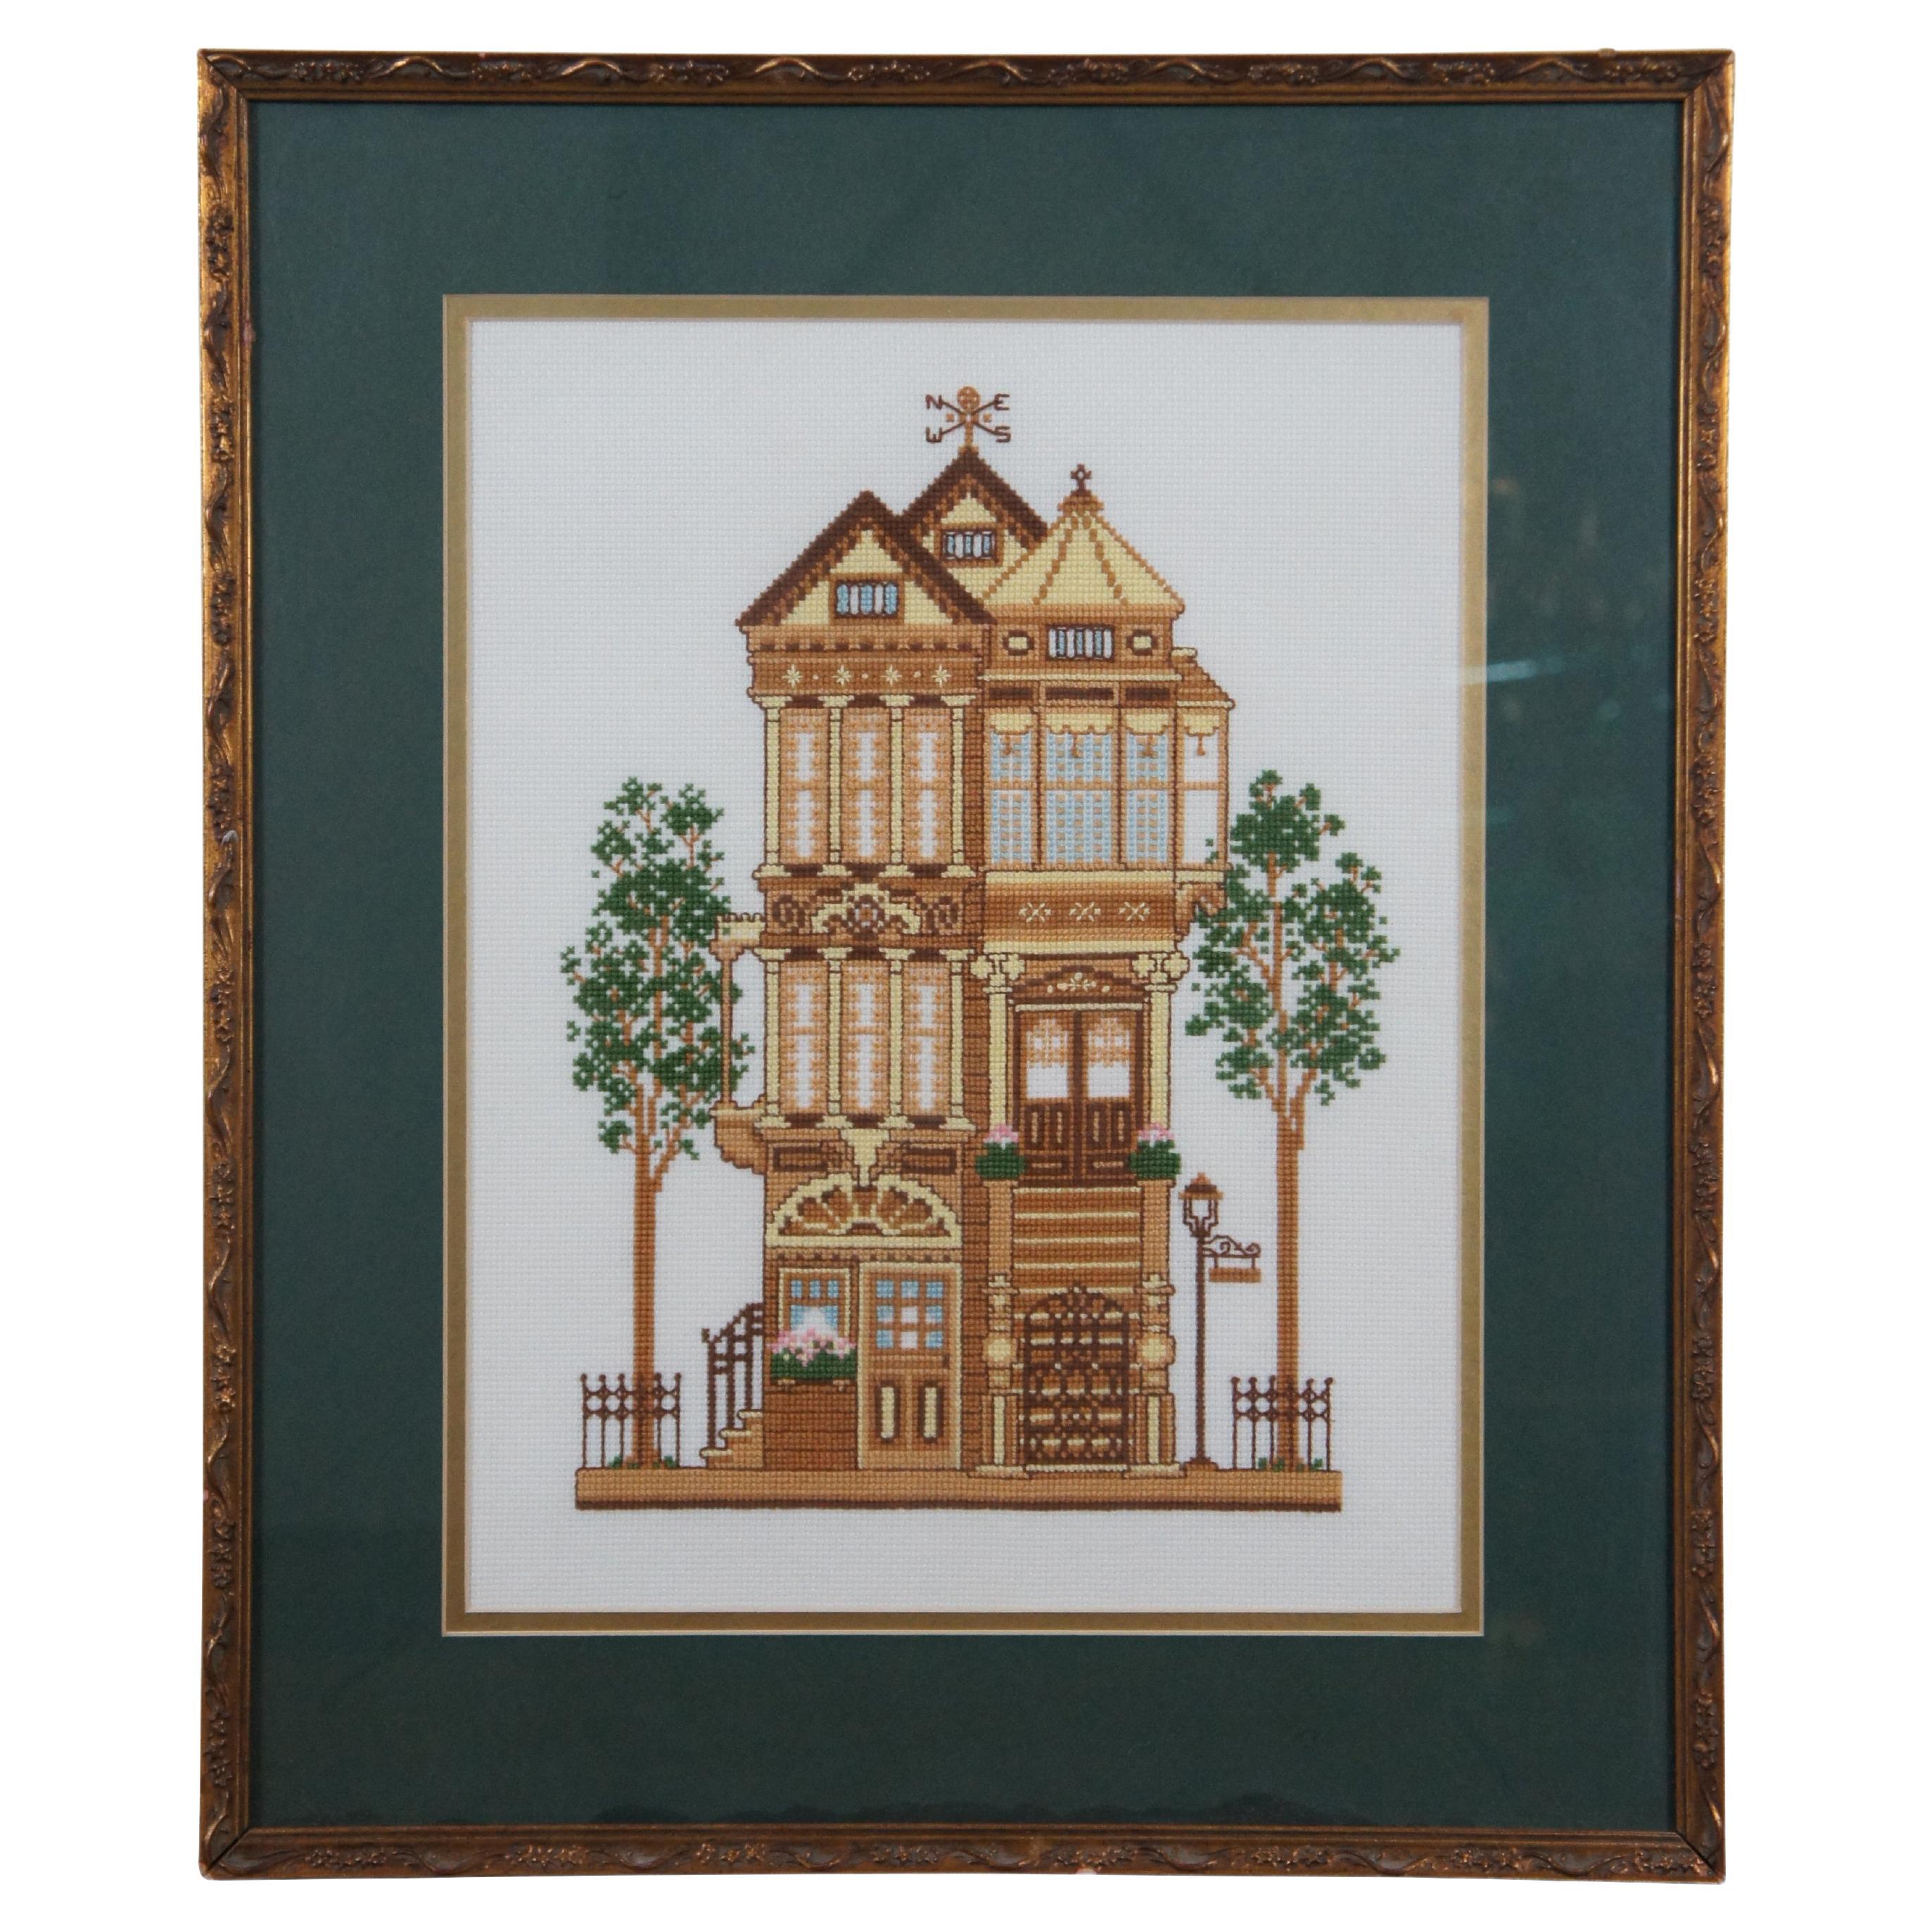 1980s Framed Cross Stitch Embroidery Turn of the Century Yellow House Sunset 294